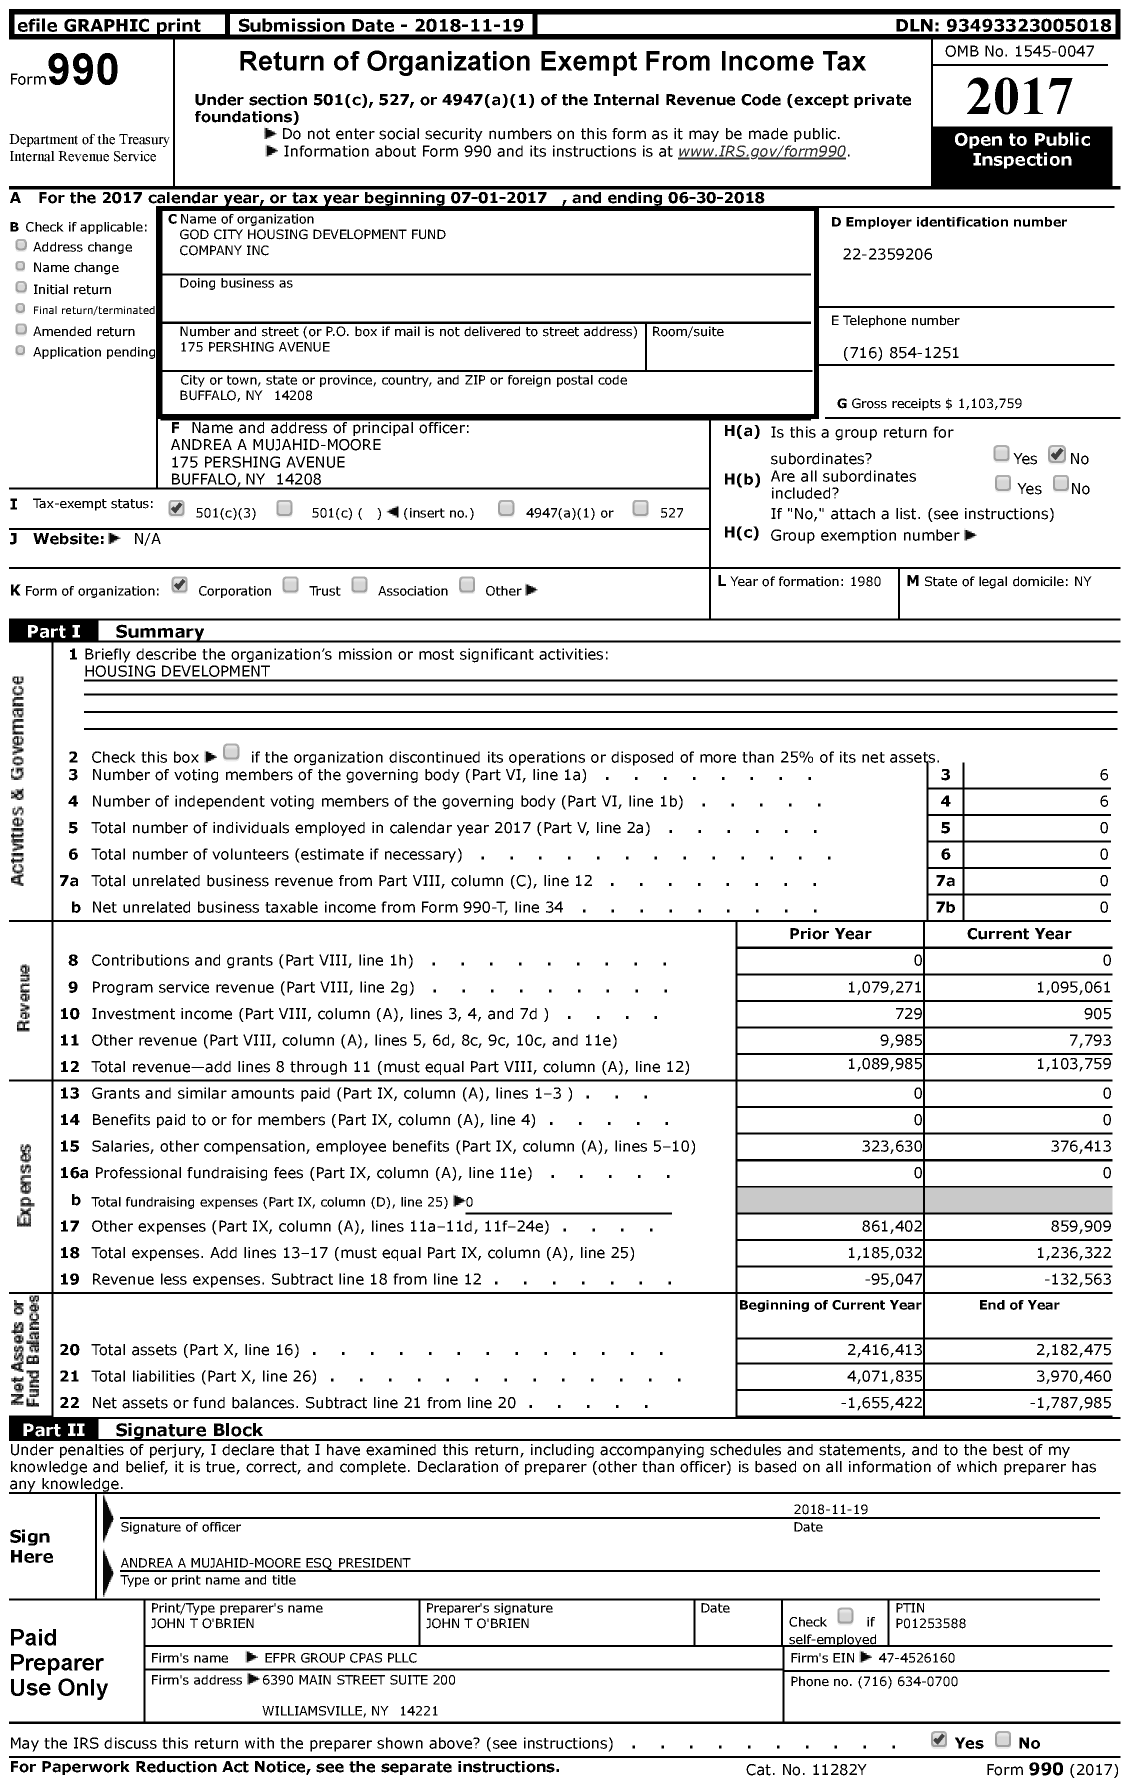 Image of first page of 2017 Form 990 for God City Housing Development Fund Company